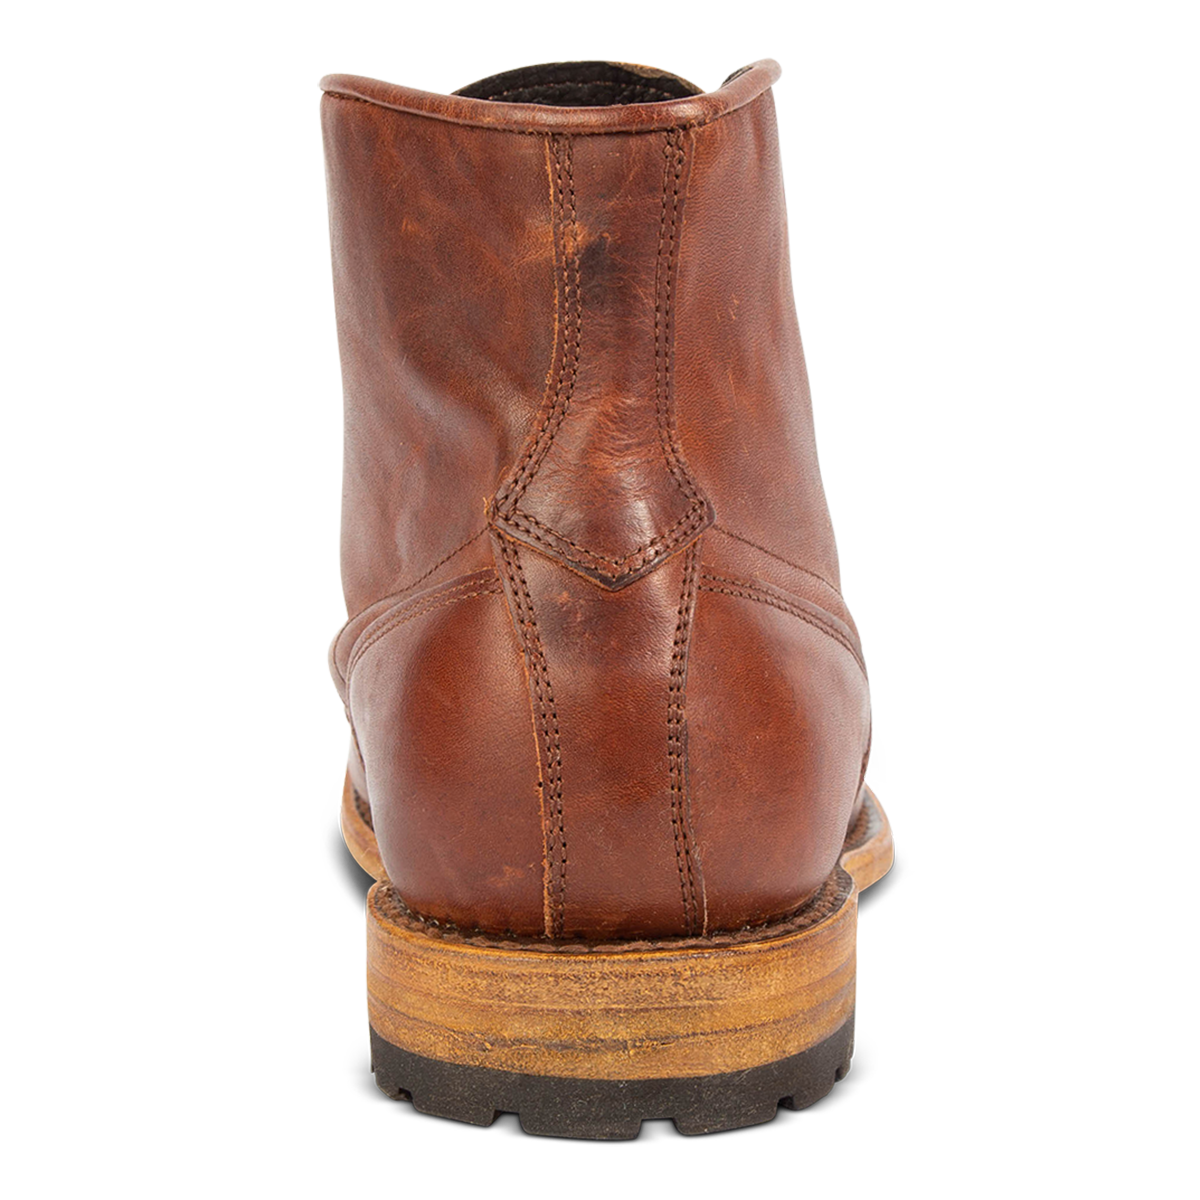 Back view showing stitch detailing and leather tread sole on FREEBIRD men's Benning cognac boot